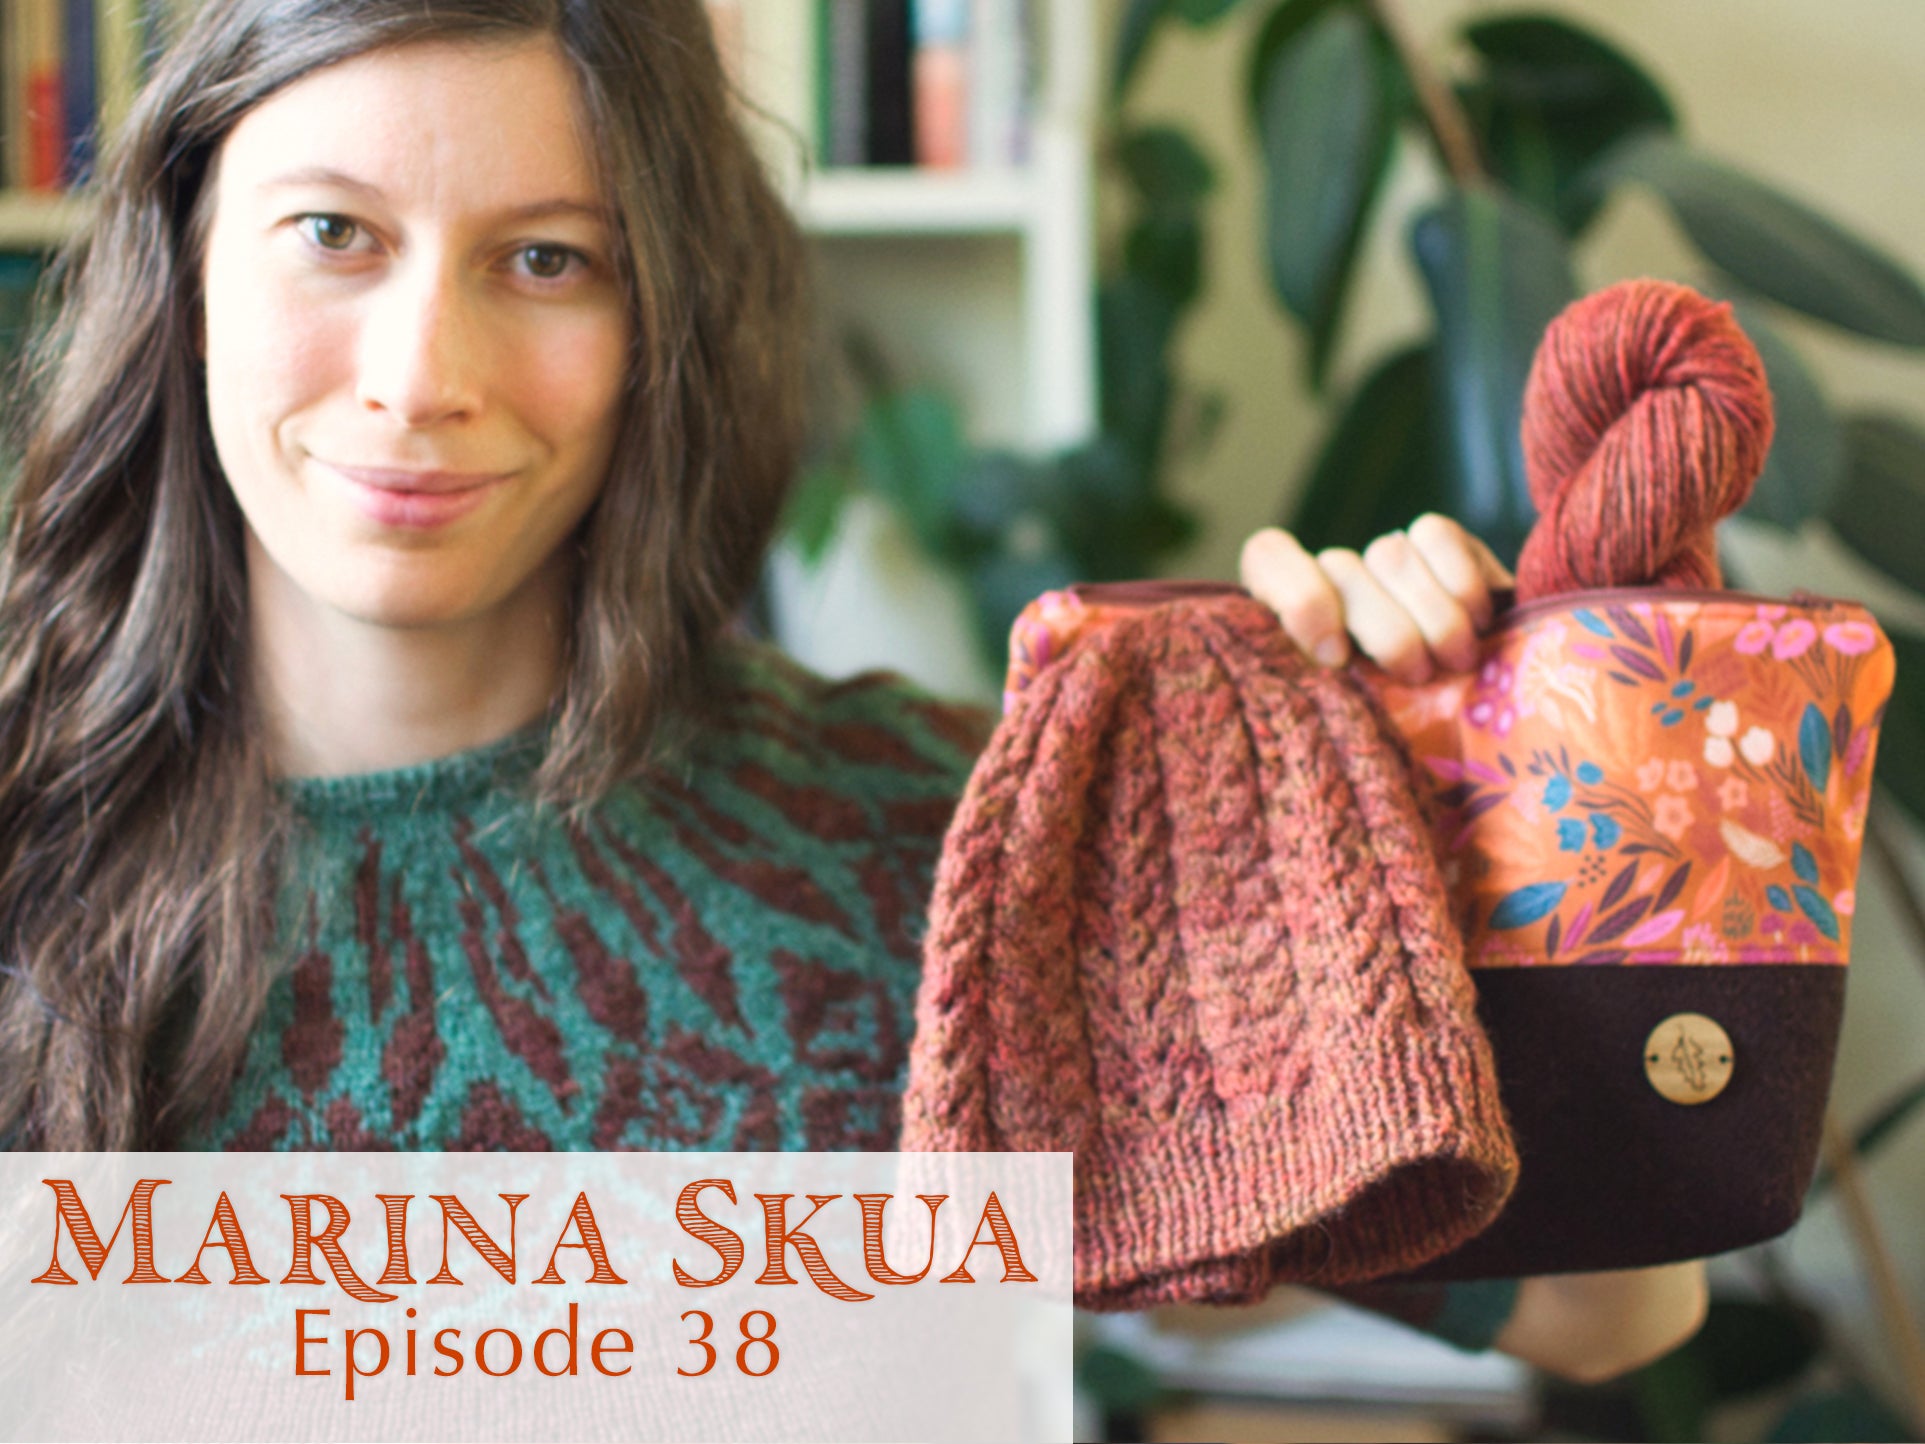 Episode 38 of the Podcast – Hibernating, baby knitting, designing cosy cables, and spinning scraps